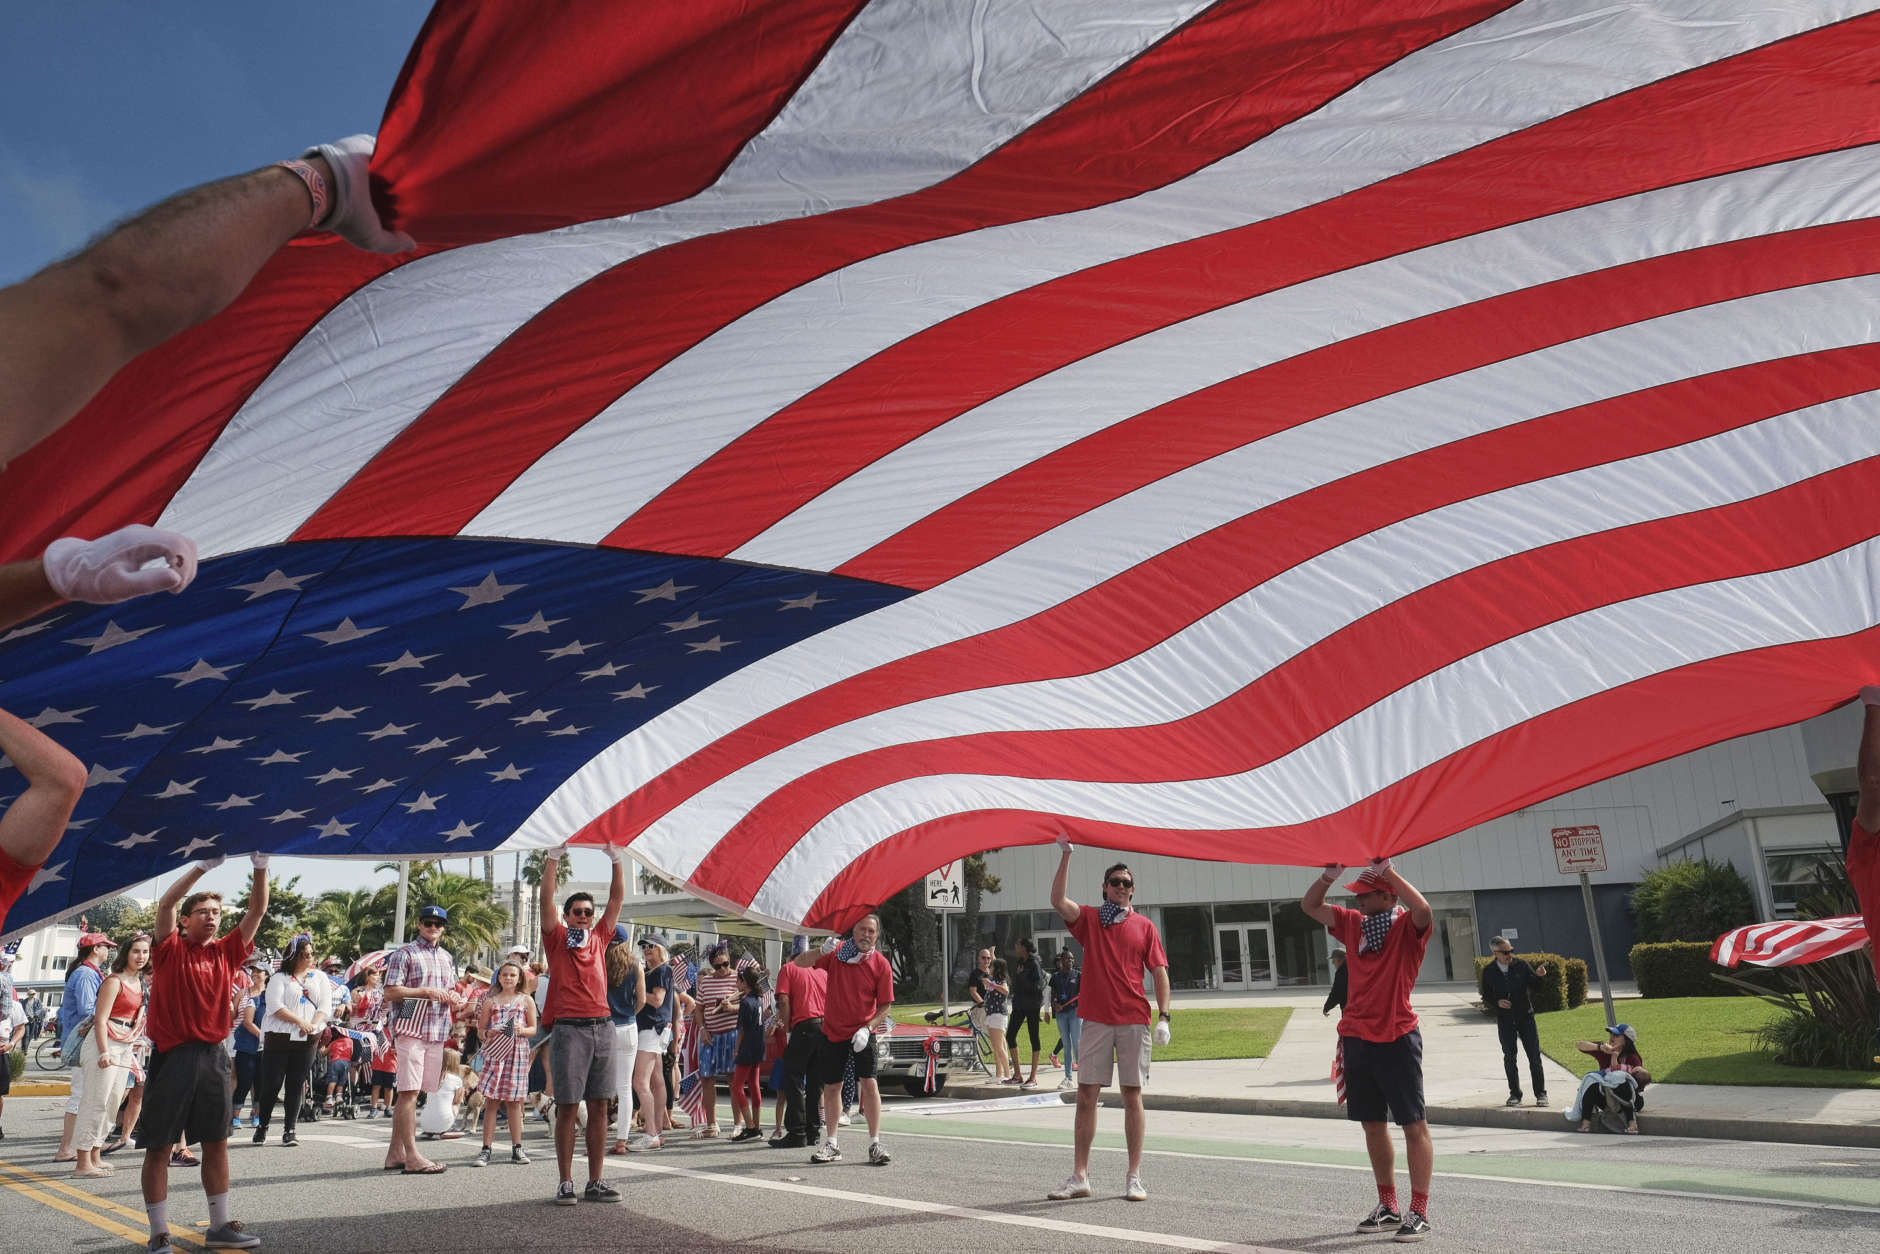 Participants carry an American flag during the 4th of July parade in Santa Monica, Calif. on Tuesday, July 4, 2017. Decked out in red, white and blue, Californians waved flags and sang patriotic songs at Independence Day parades across the state. (AP Photo/Richard Vogel)